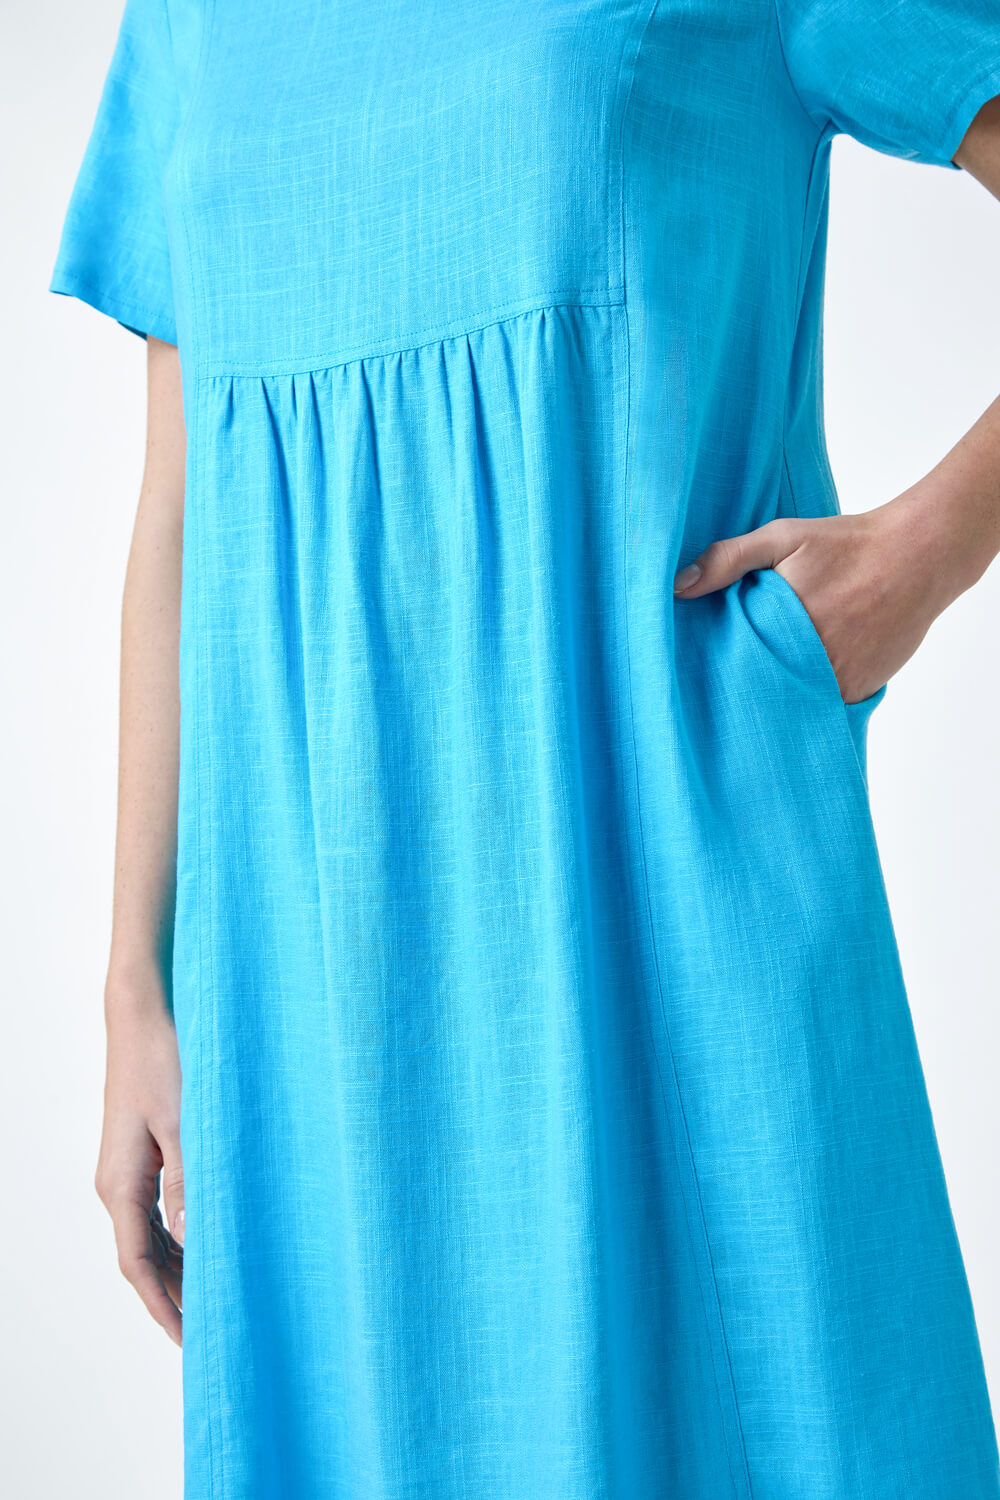 Turquoise Relaxed Pocket Dress, Image 5 of 5